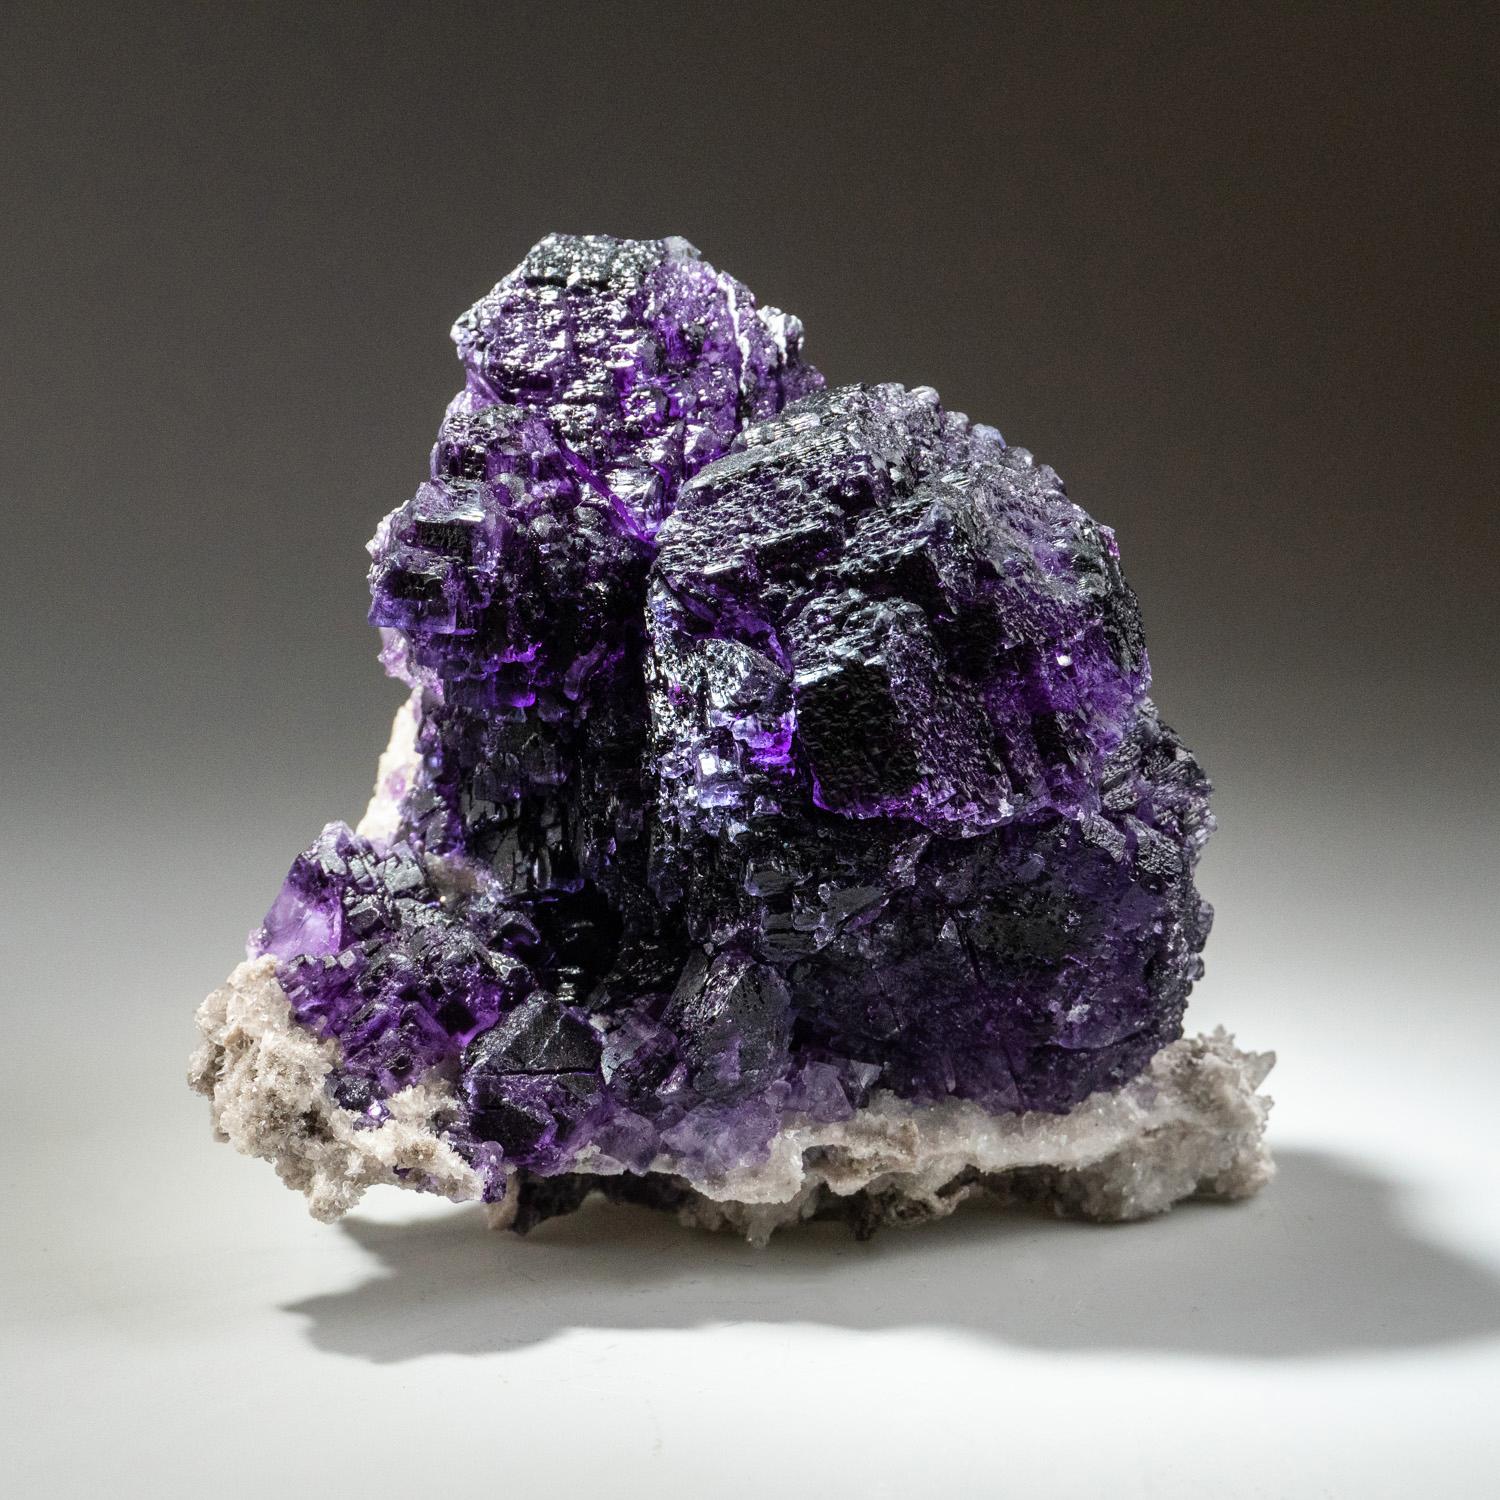 From Minggang Mine, Henan Province, China Translucent cubic purple fluorite crystals overgrown on a bed of metallic luster sphalerite crystals. on matrix. The fluorite has rich purple zoning outlining the crystal faces. The combination of the